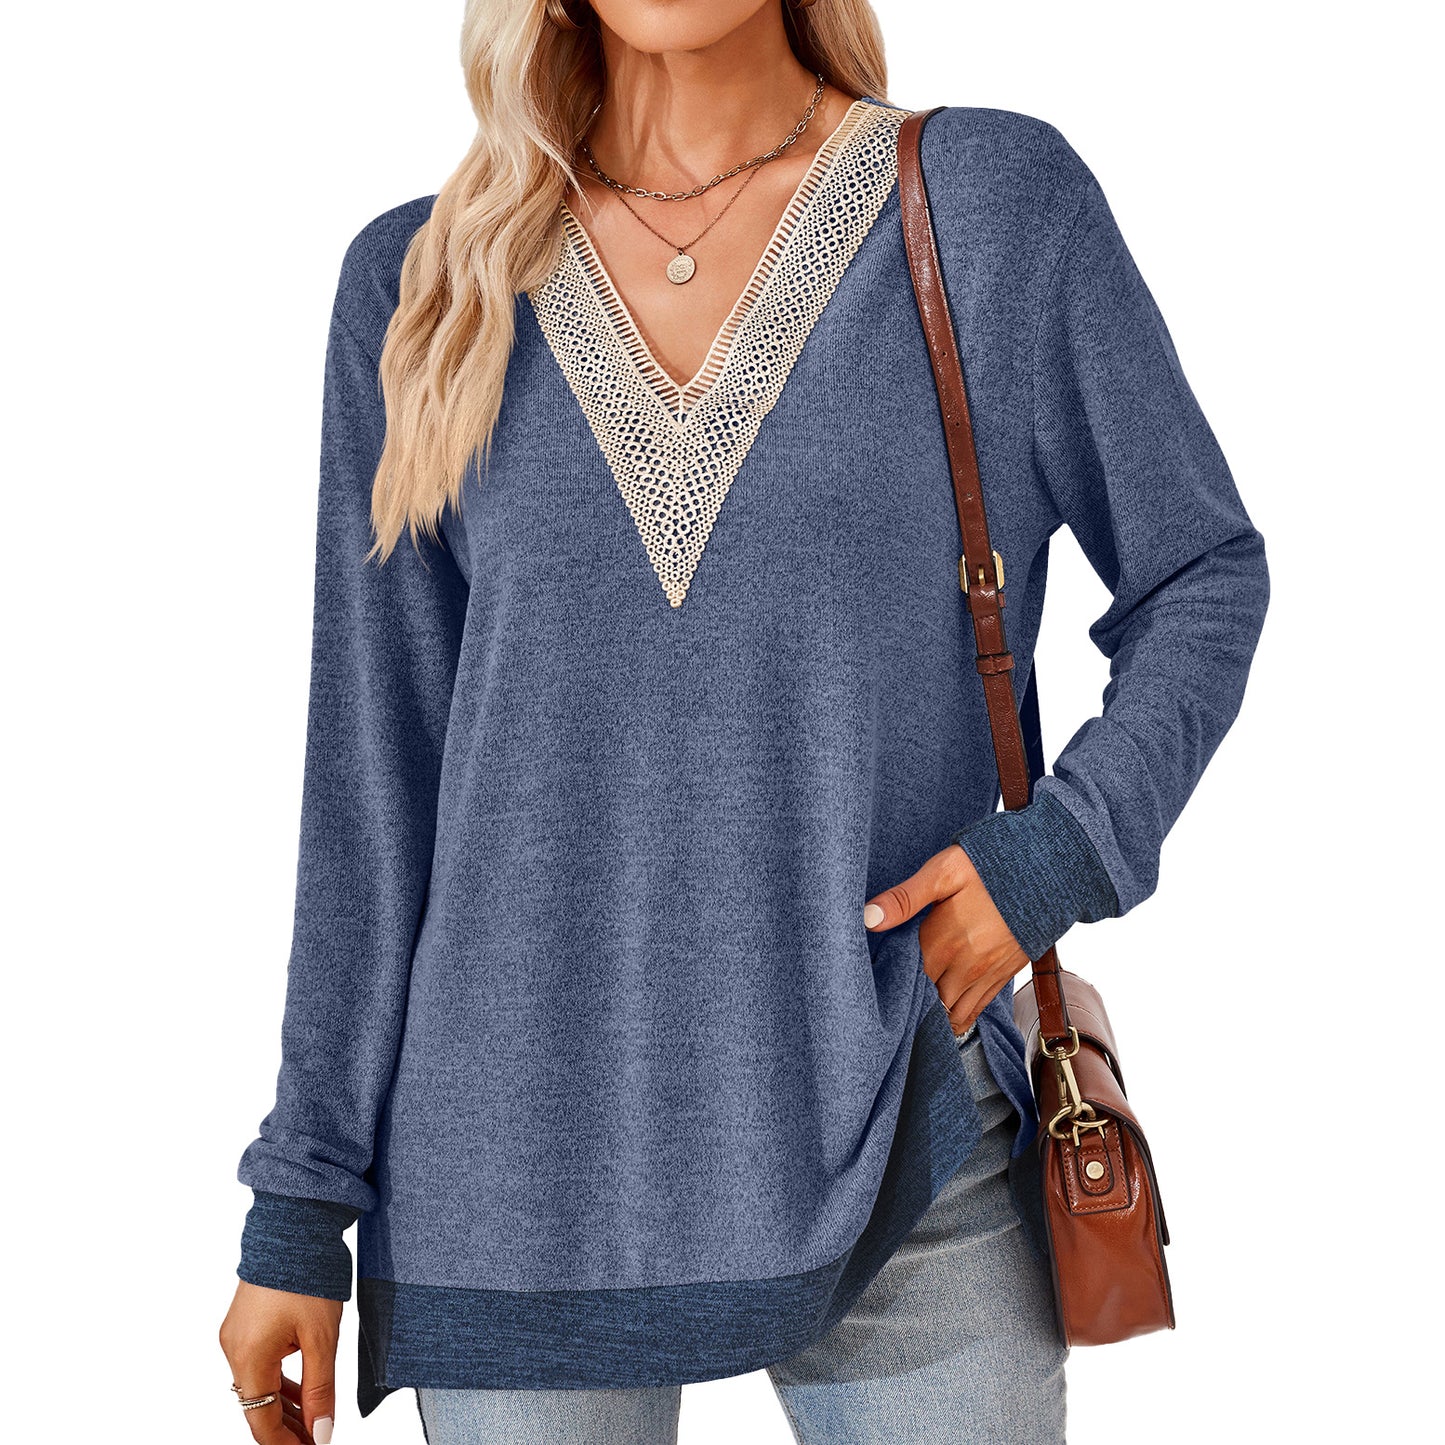 Women's Fashion V-neck Lace Solid Color Loose-fitting T-shirt Top